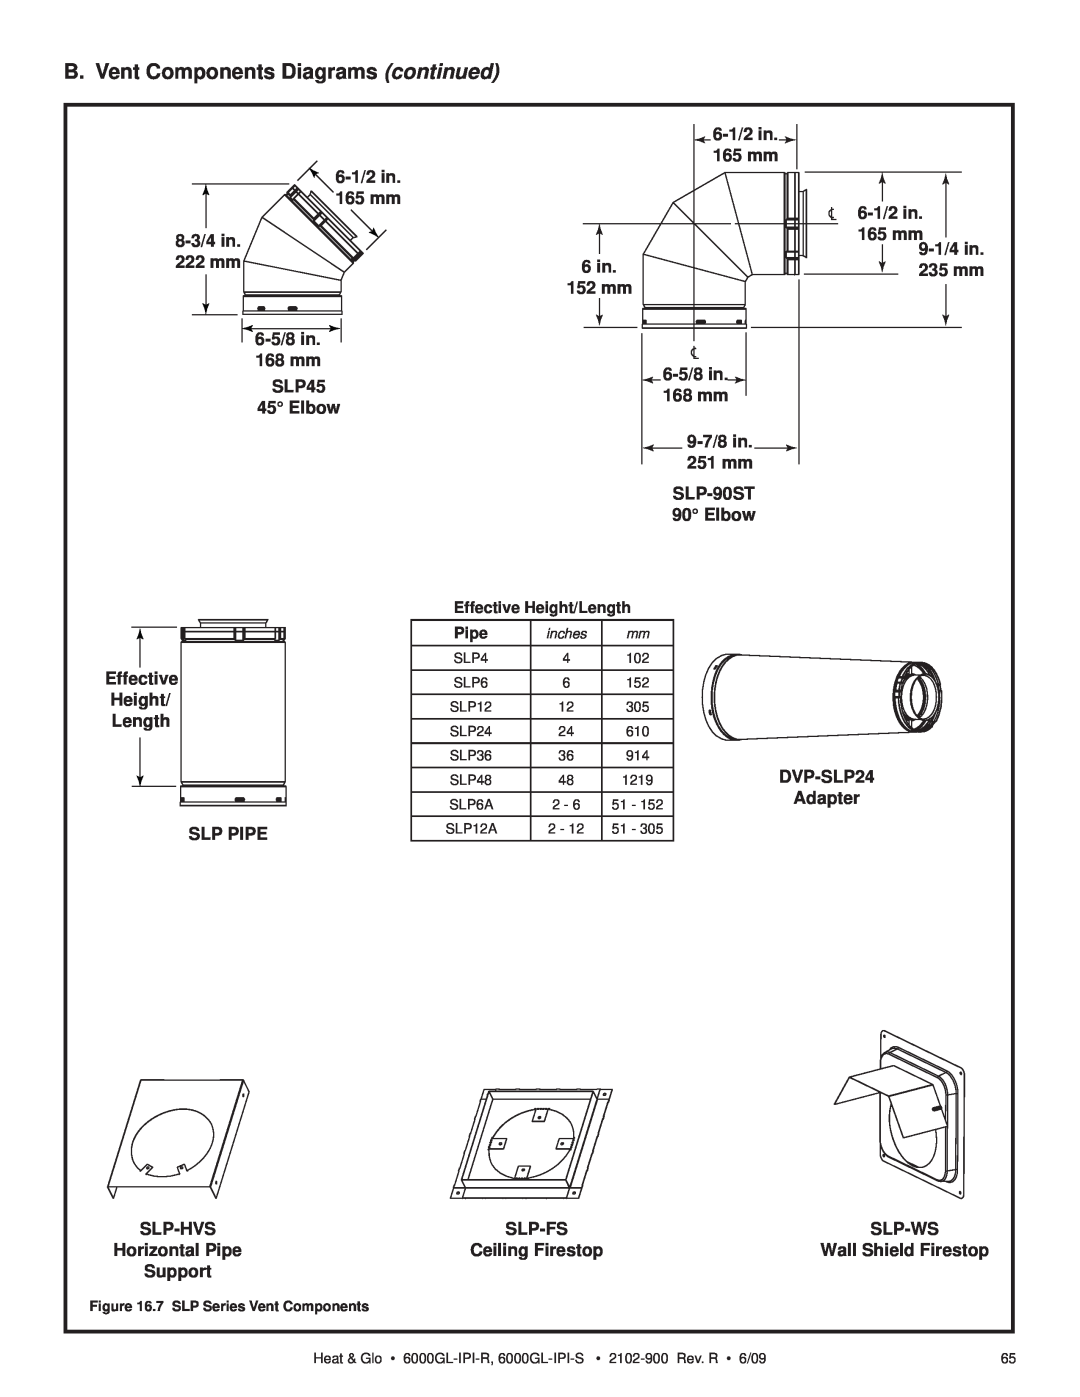 Heat & Glo LifeStyle 6000GL-IPILP-R B. Vent Components Diagrams continued, 6-1/2in, 165 mm, 8-3/4in, 9-1/4in, 222 mm, 6 in 